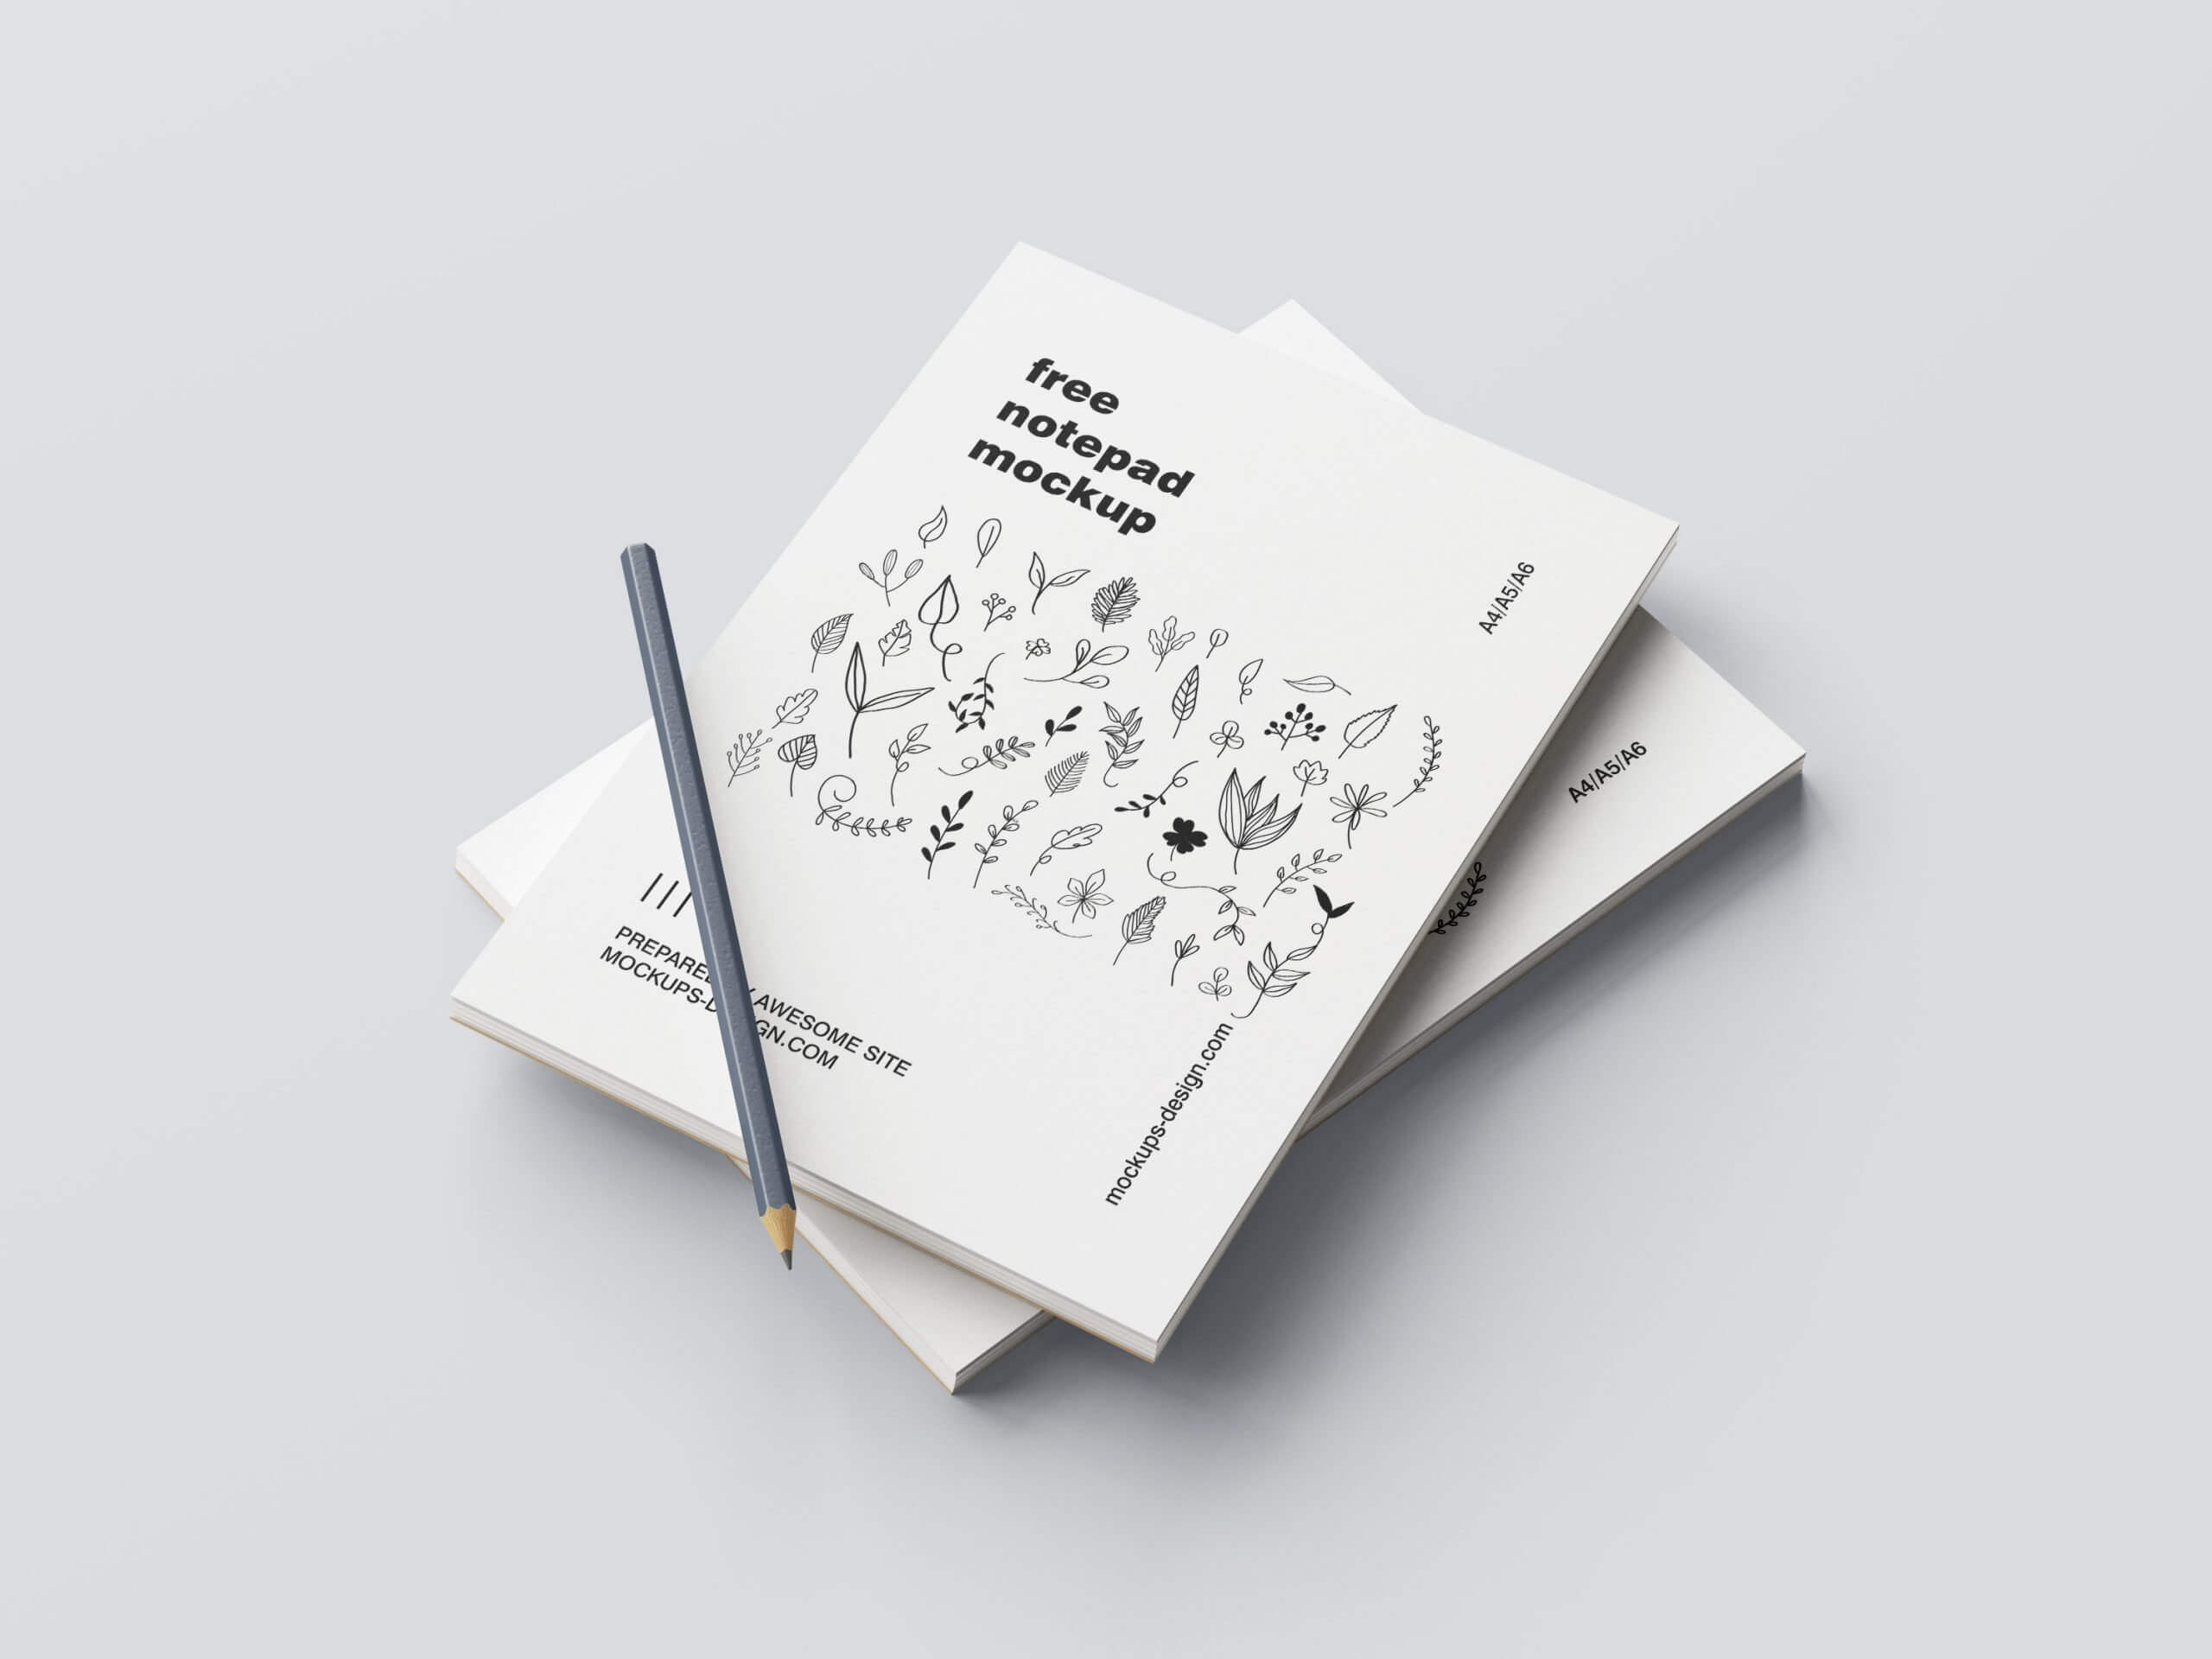 5 Mockups of Notepad with Pencil in Various Perspective Views